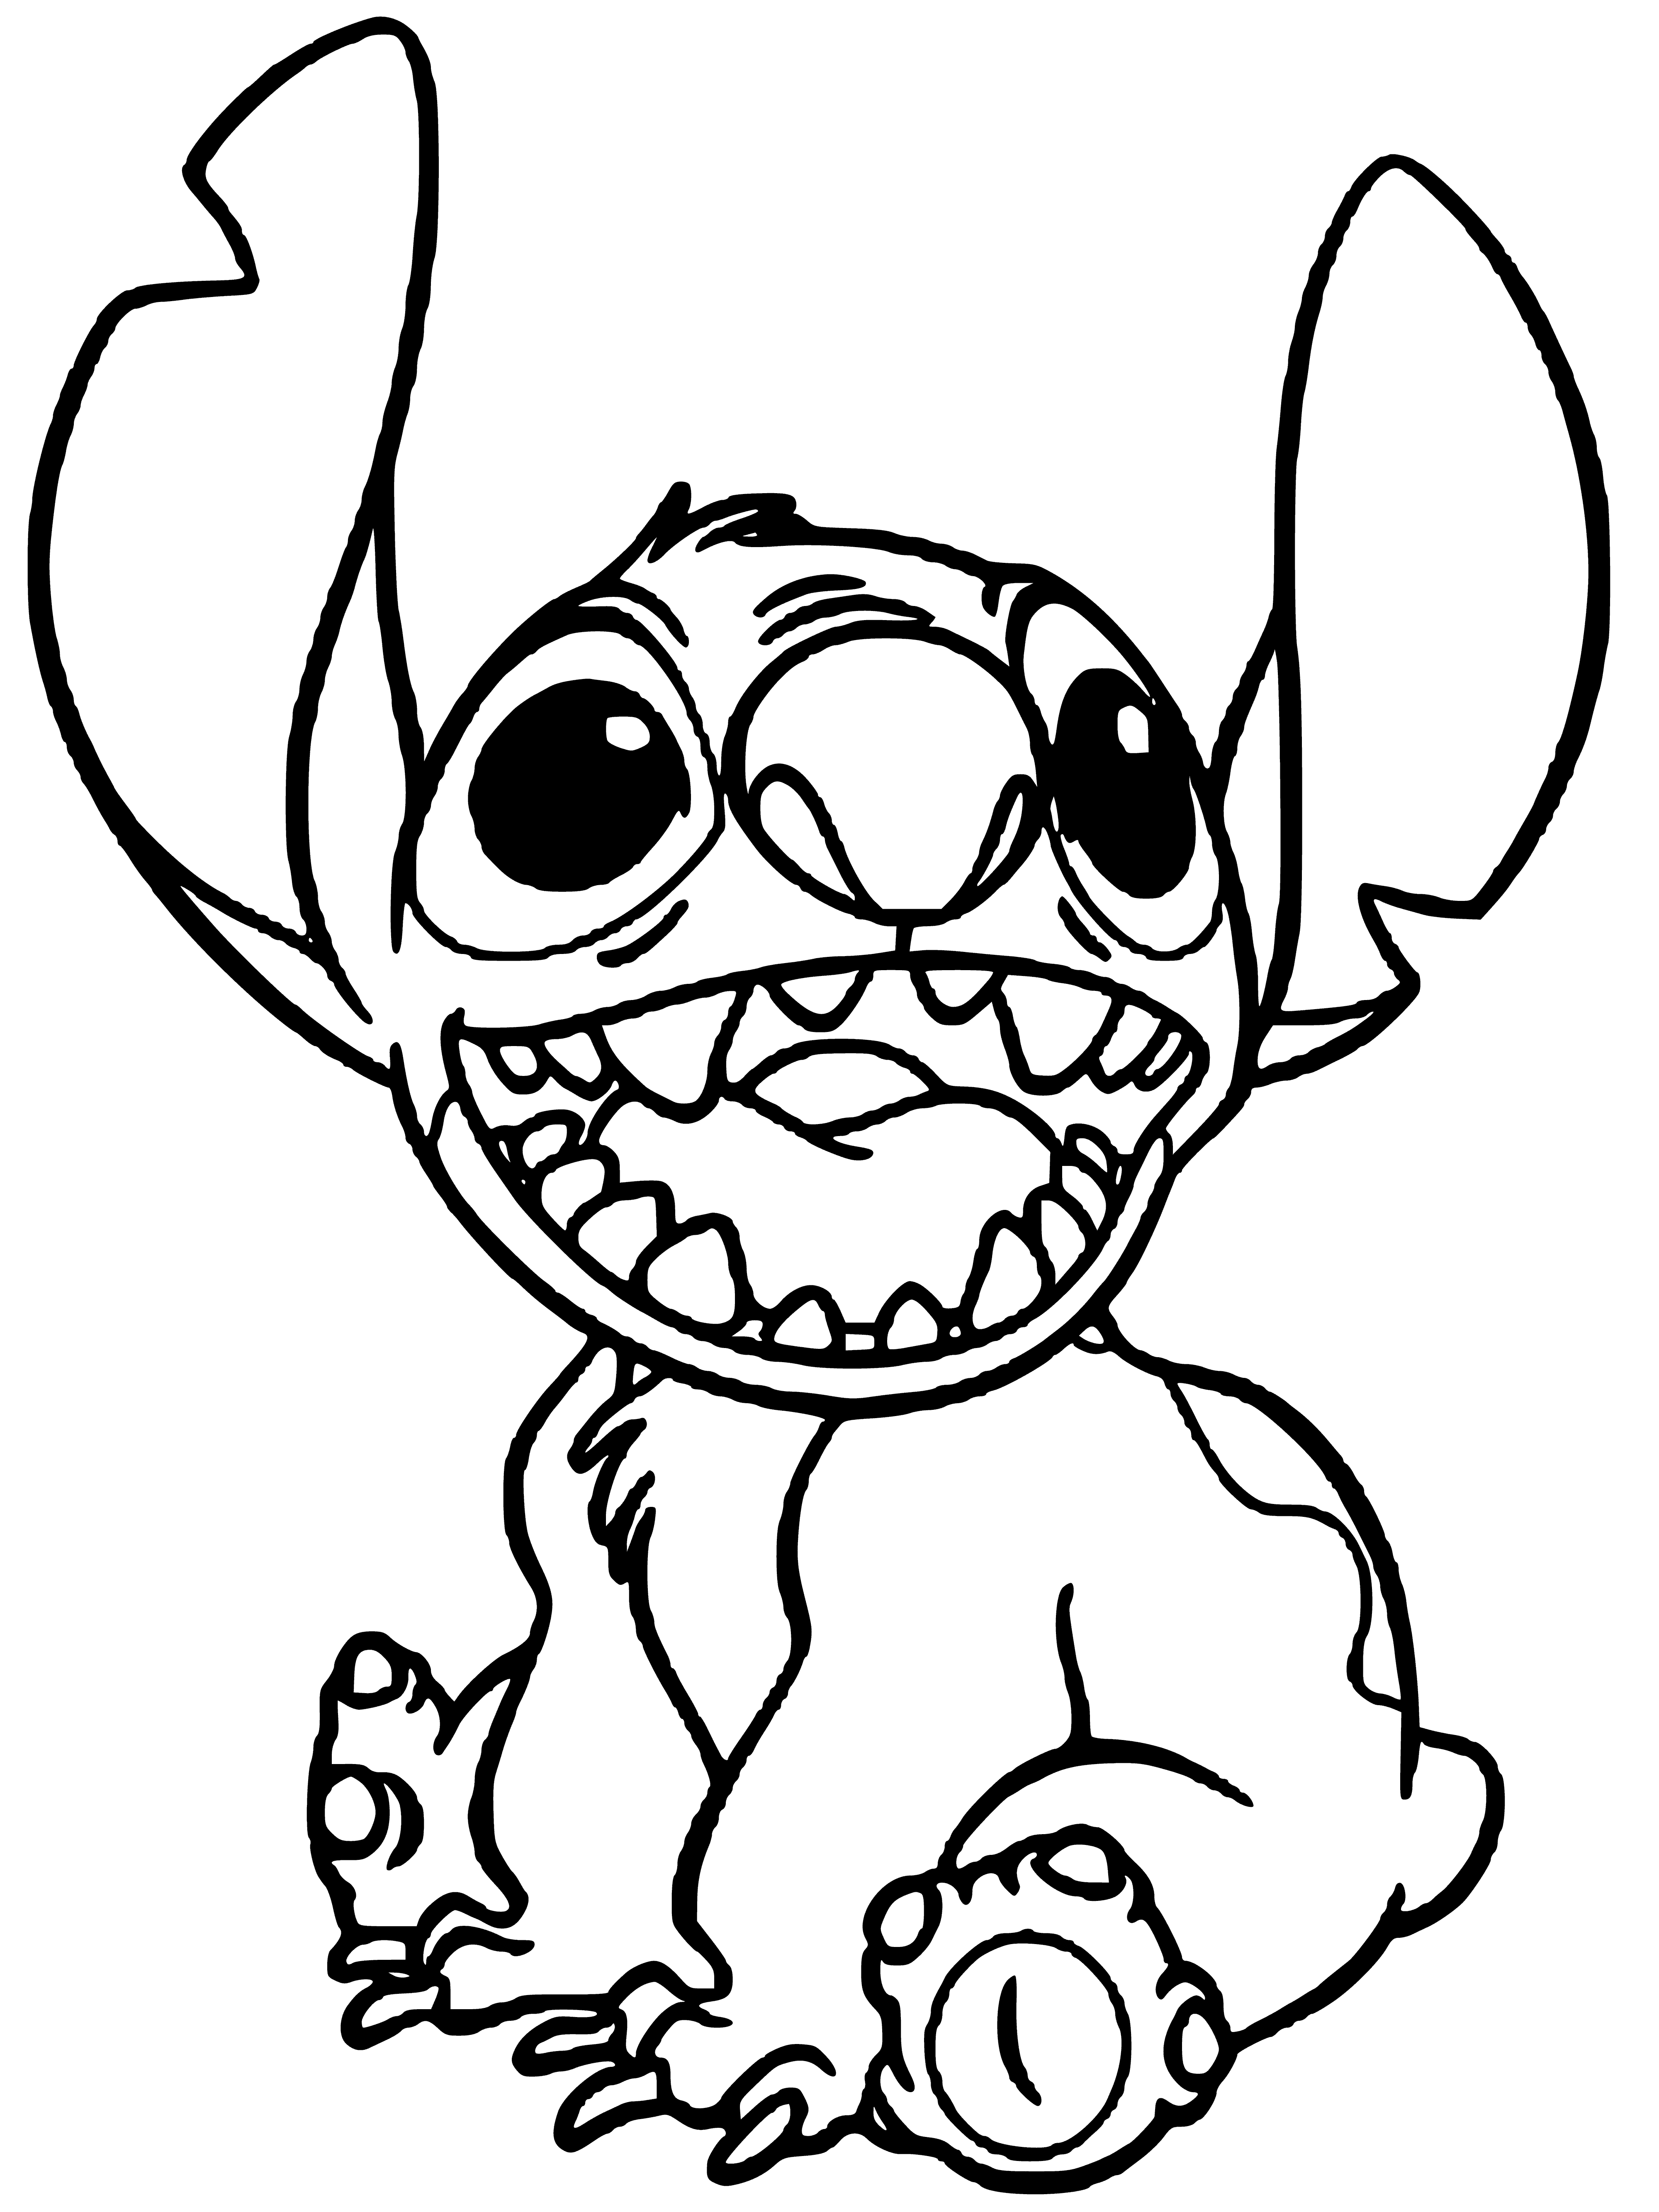 Contact coloring page